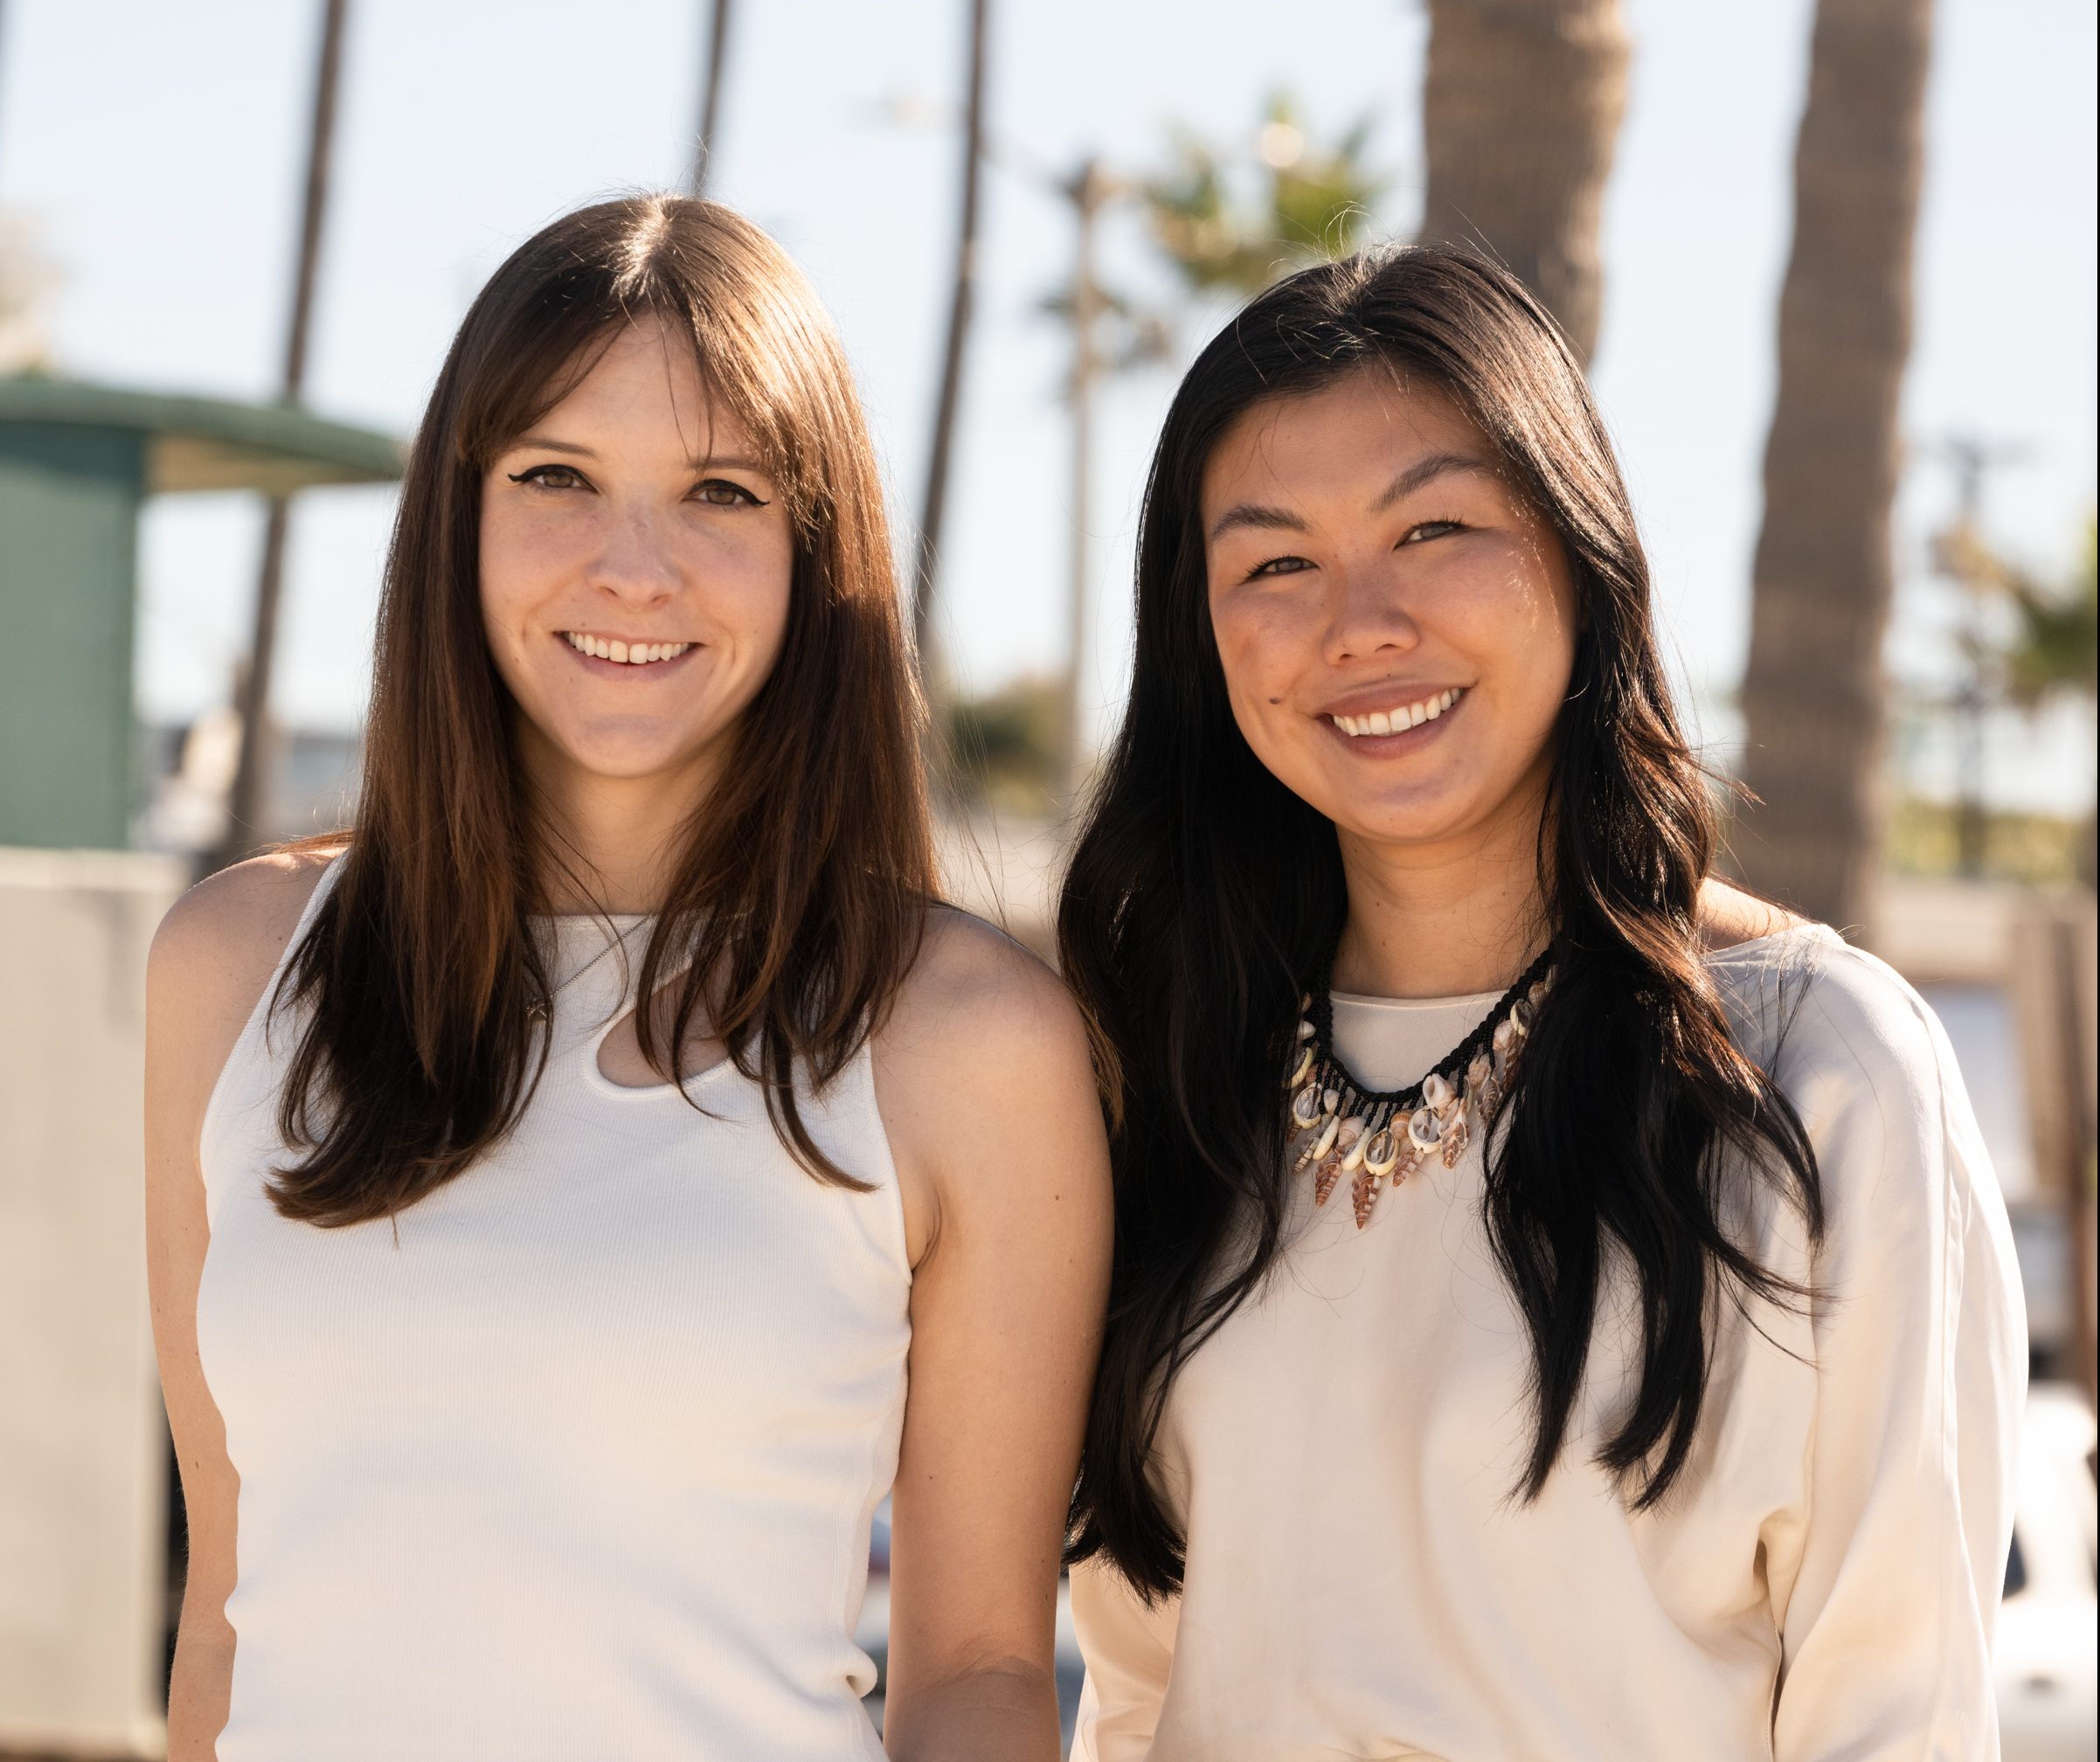 Stell founders Malory McLemore and Anne Wen